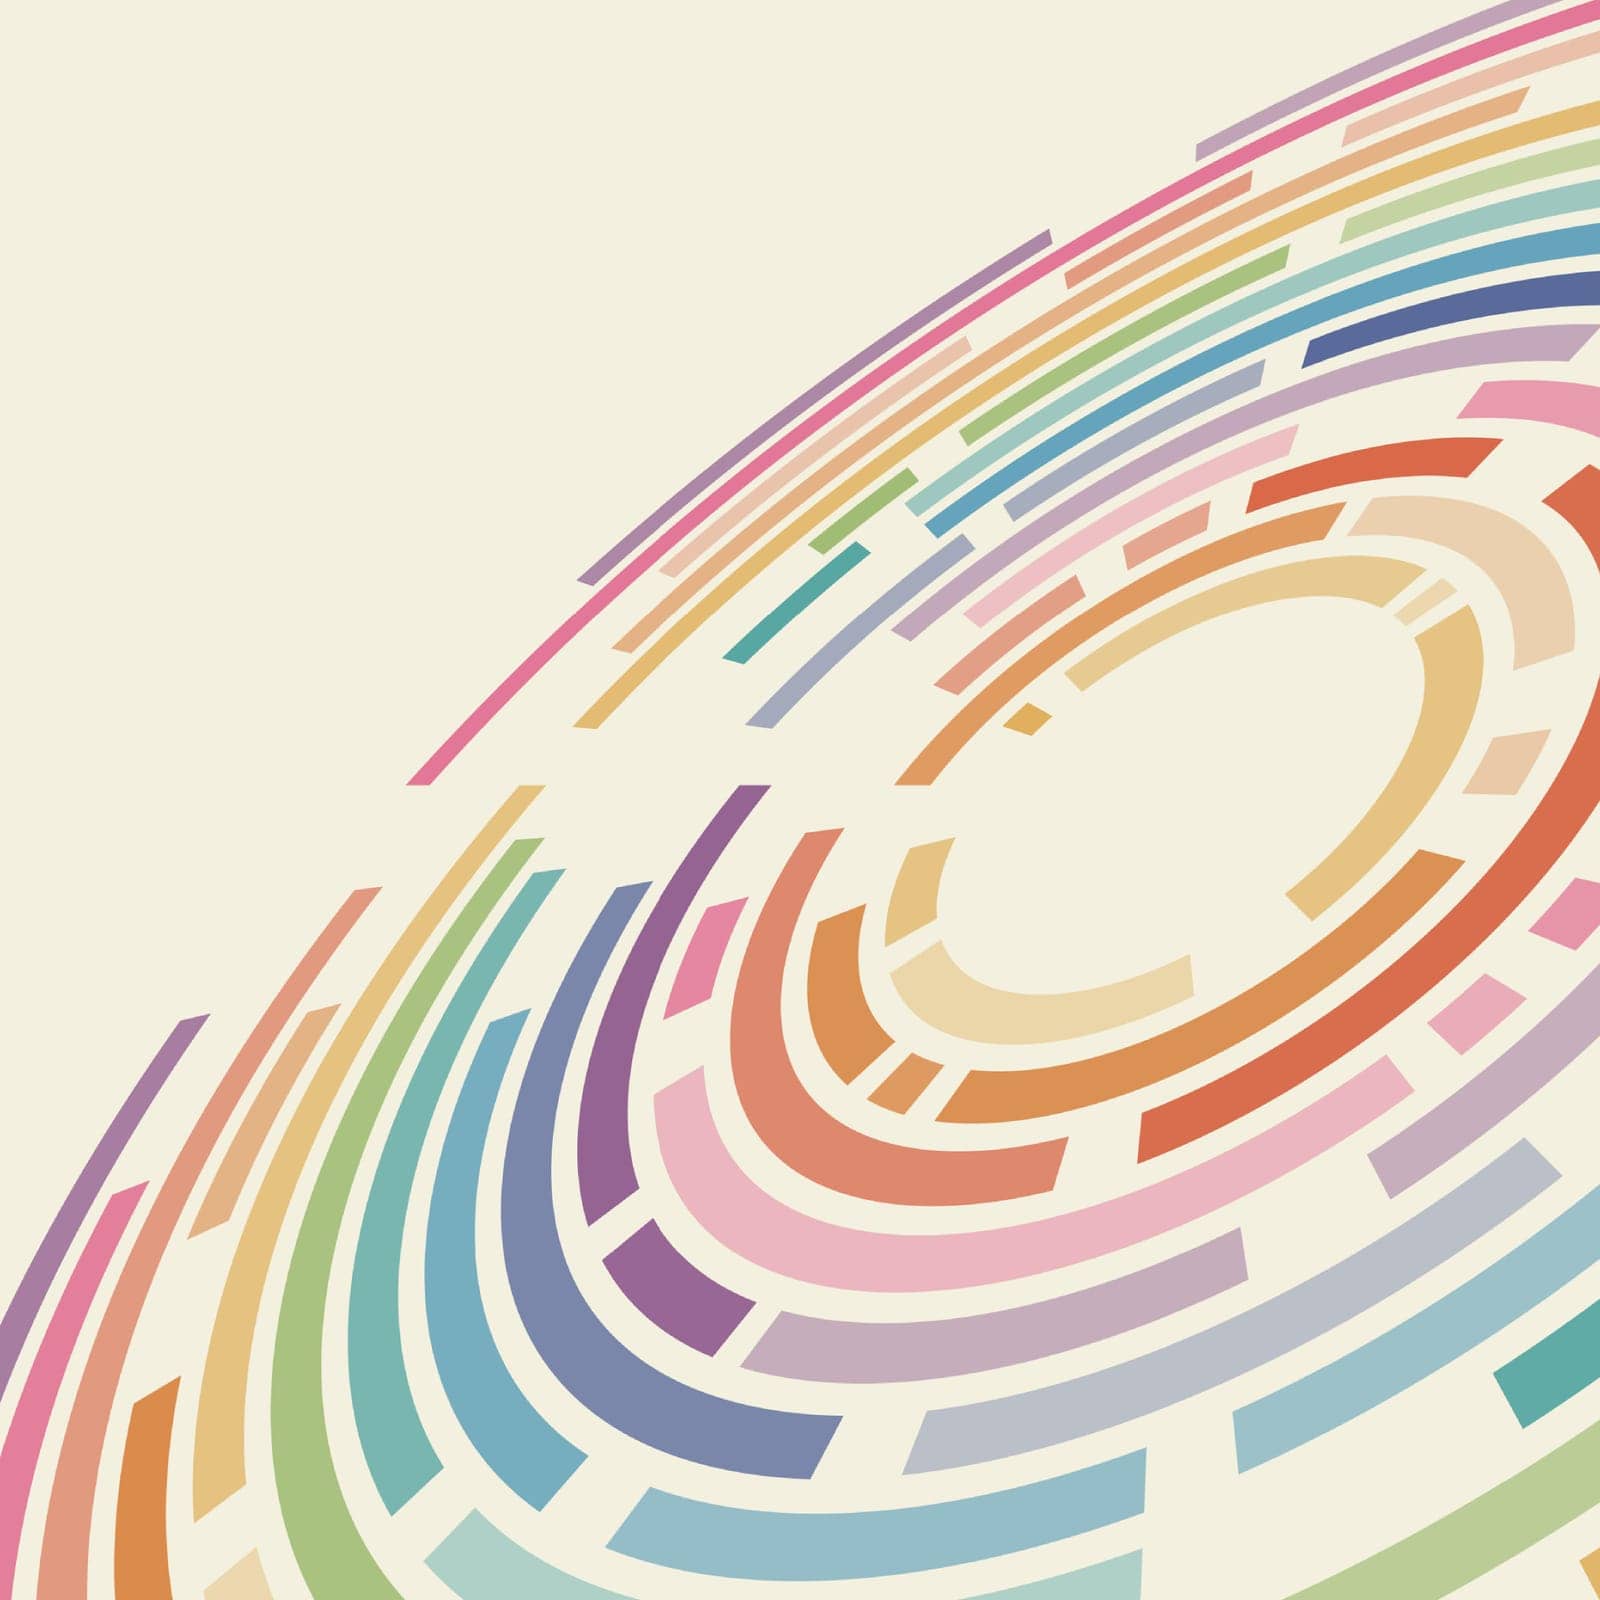 A background featuring a circular design in rainbow hues.